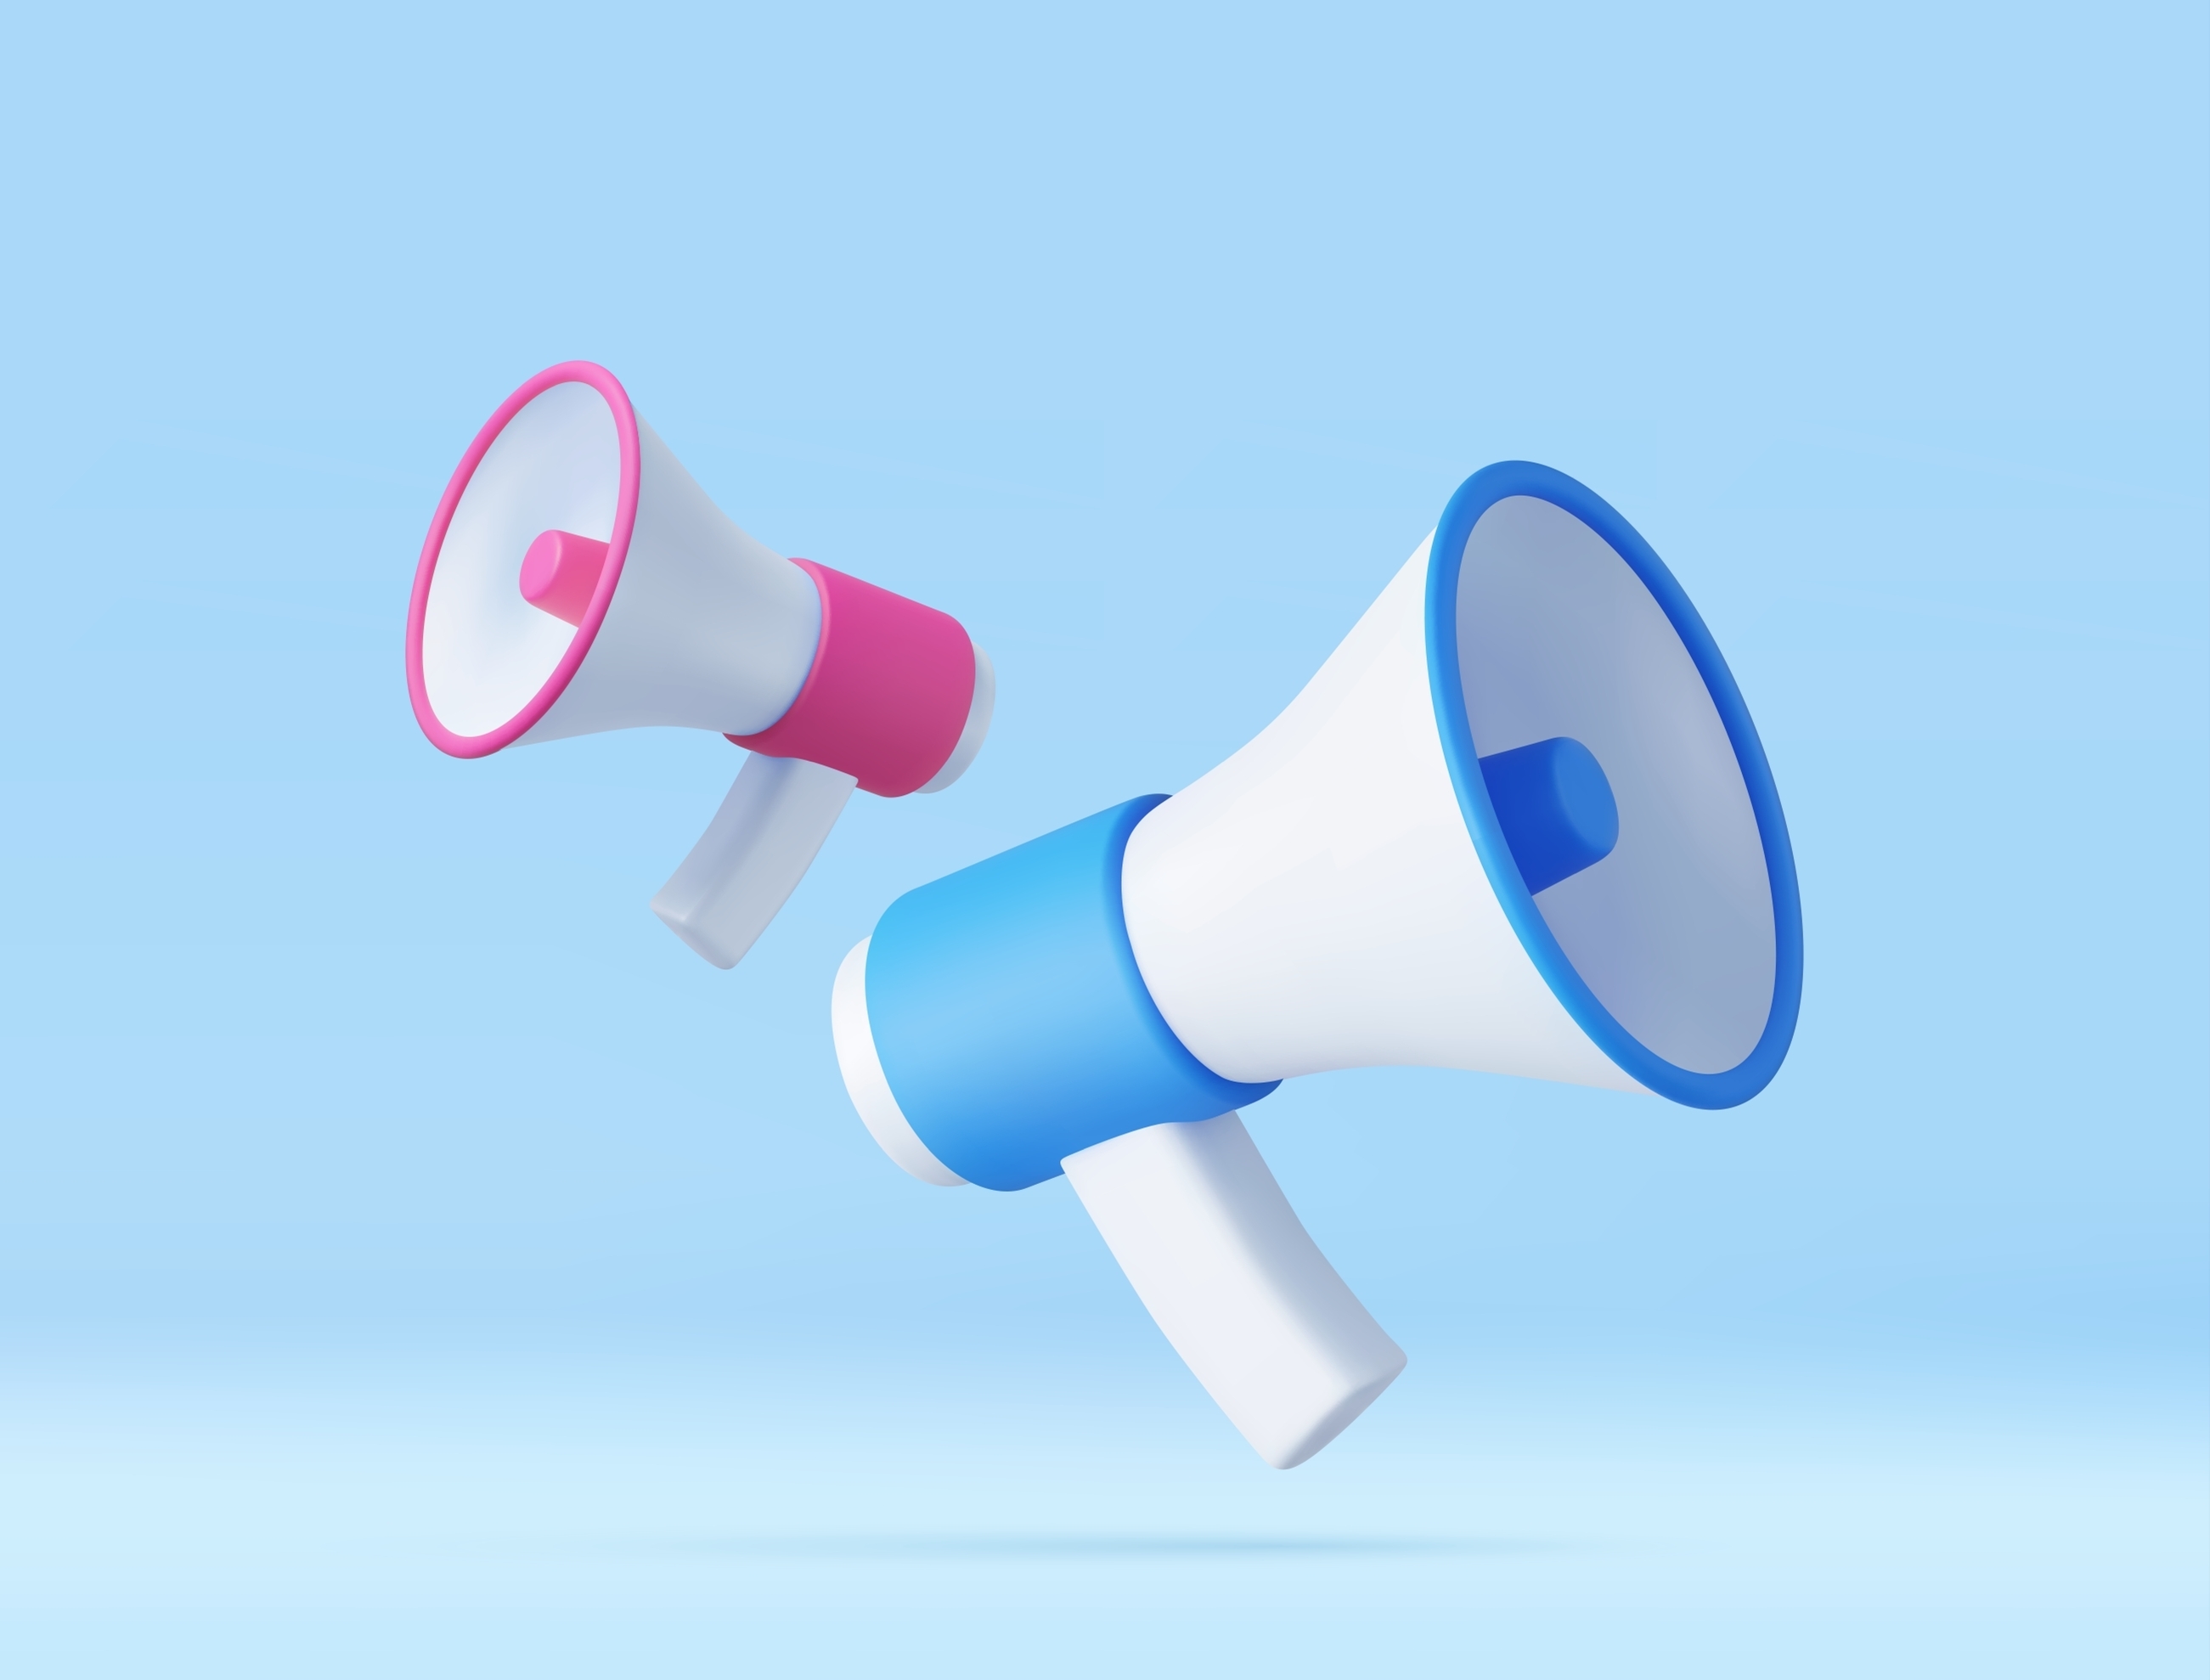 Pink and blue coloured megaphones on a blue background